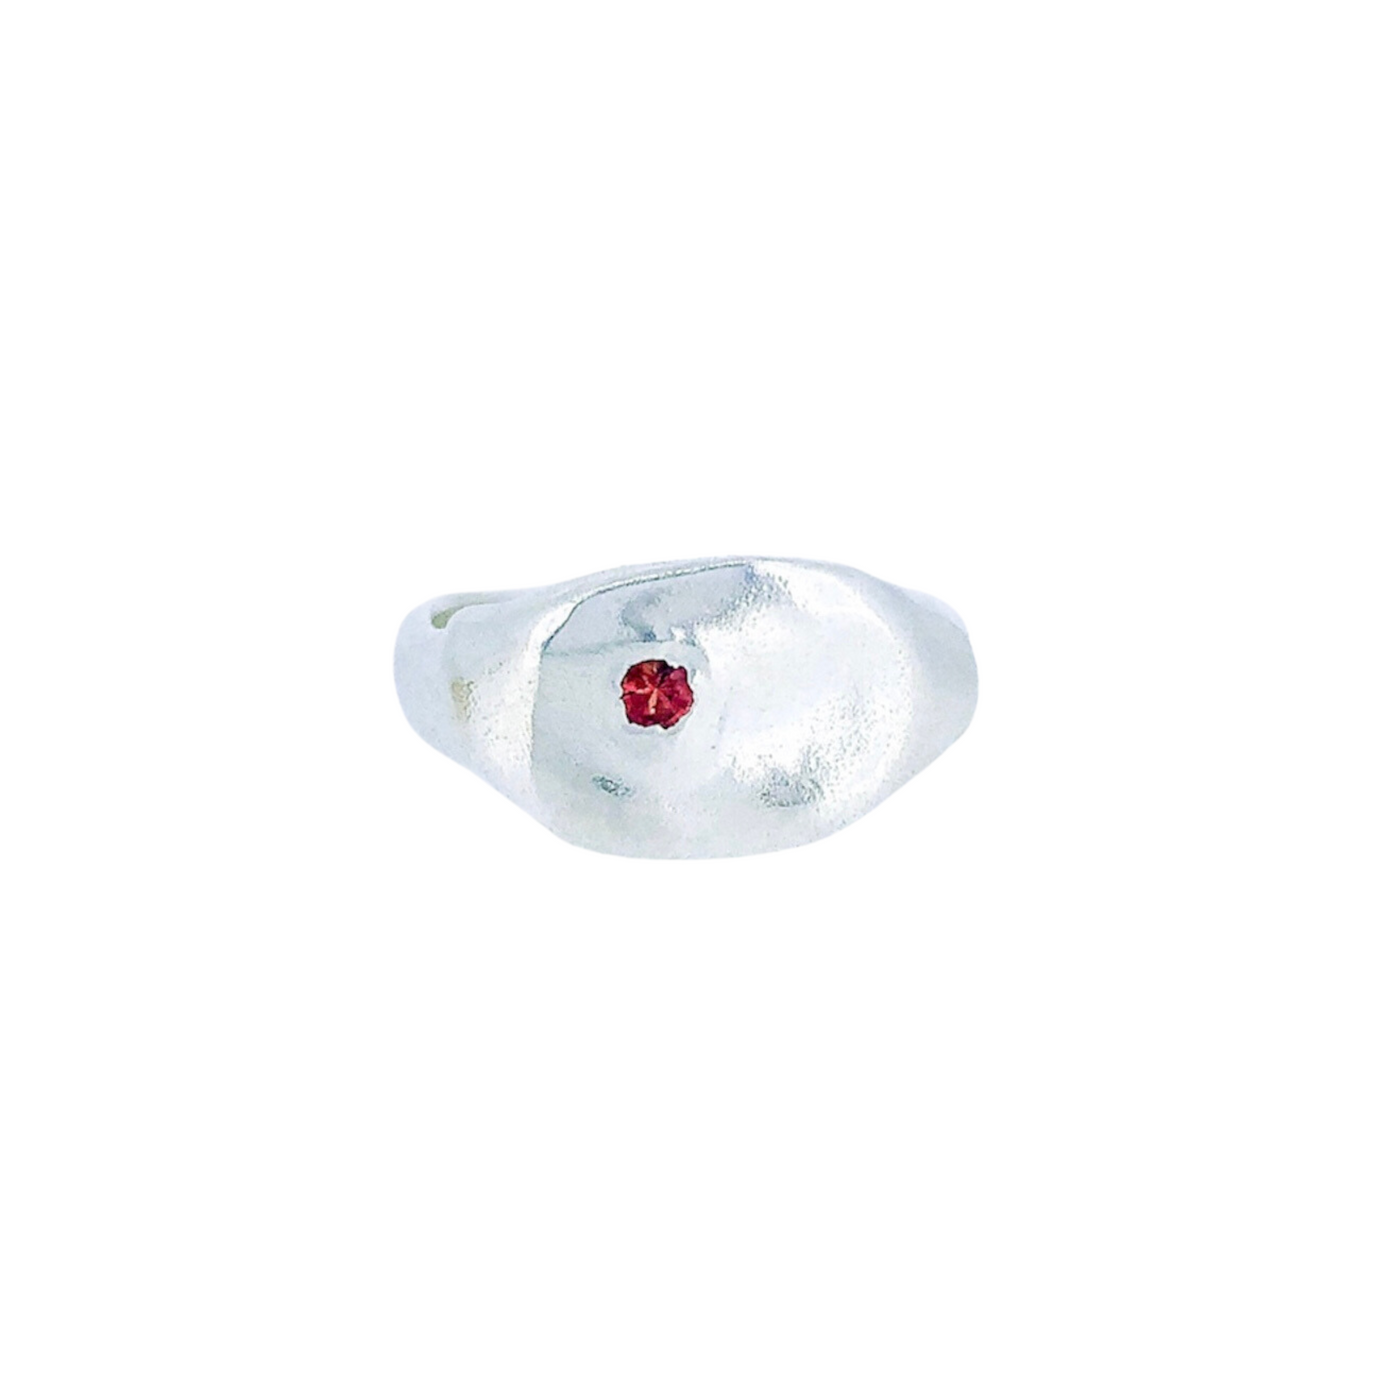 Sharlala Jewellery Melted Signet Red Sapphire Ring Sterling Silver - Radical Giving